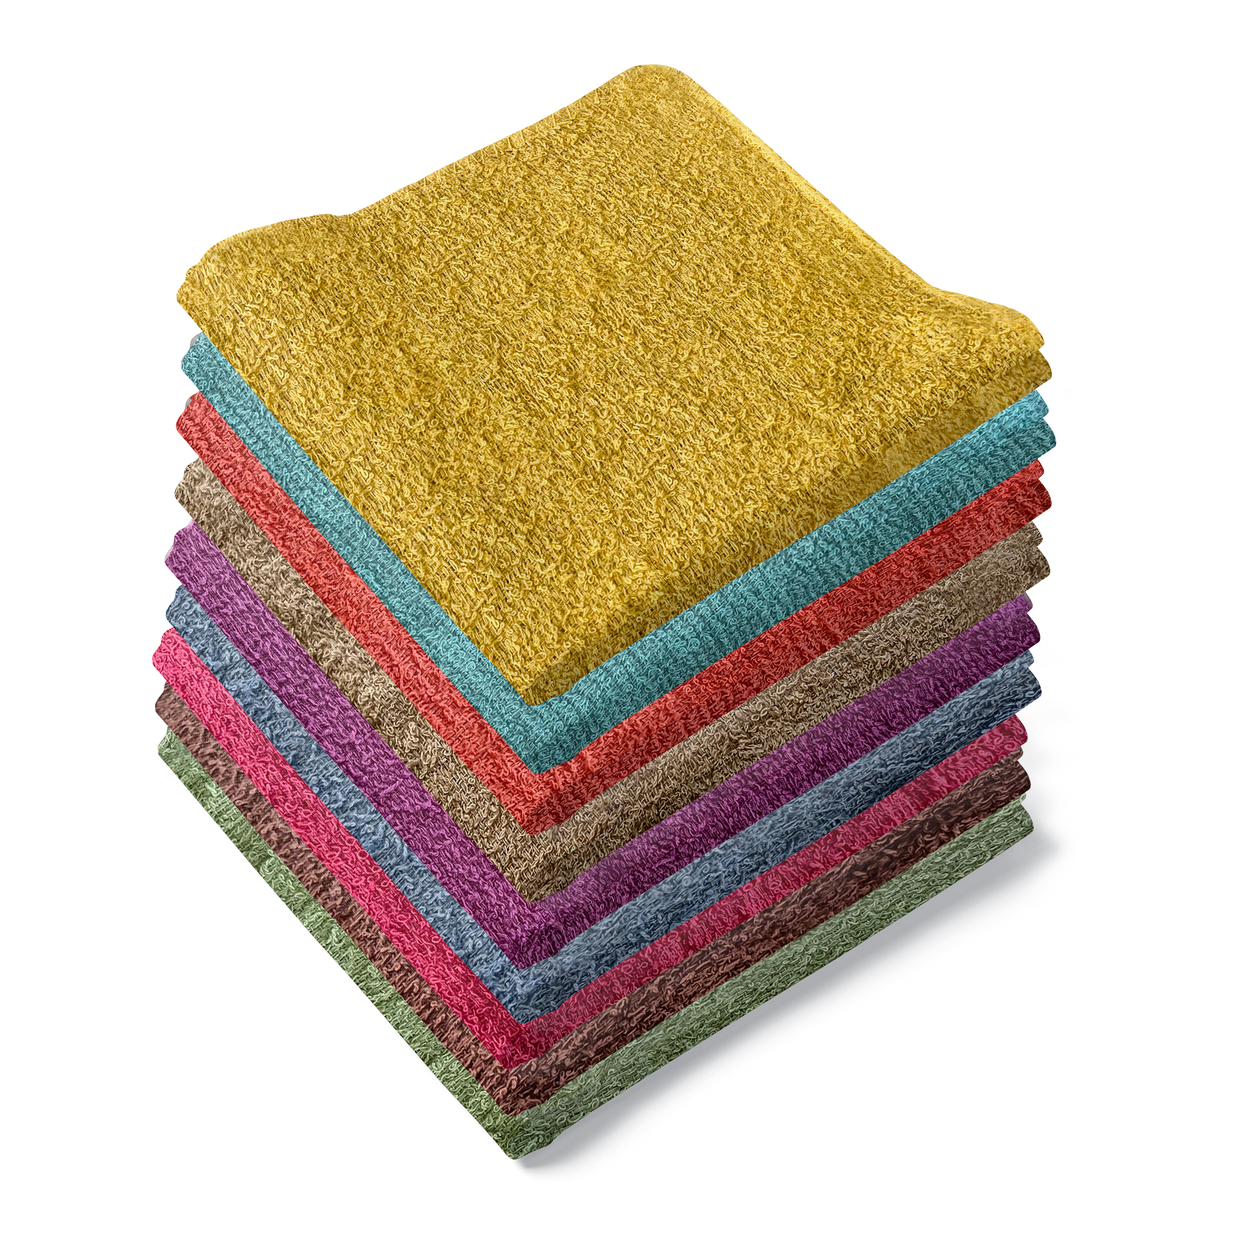 12-Pack: 100% Ultra-Soft Absorbent Cotton Multipurpose Cleaning Wash Cloths